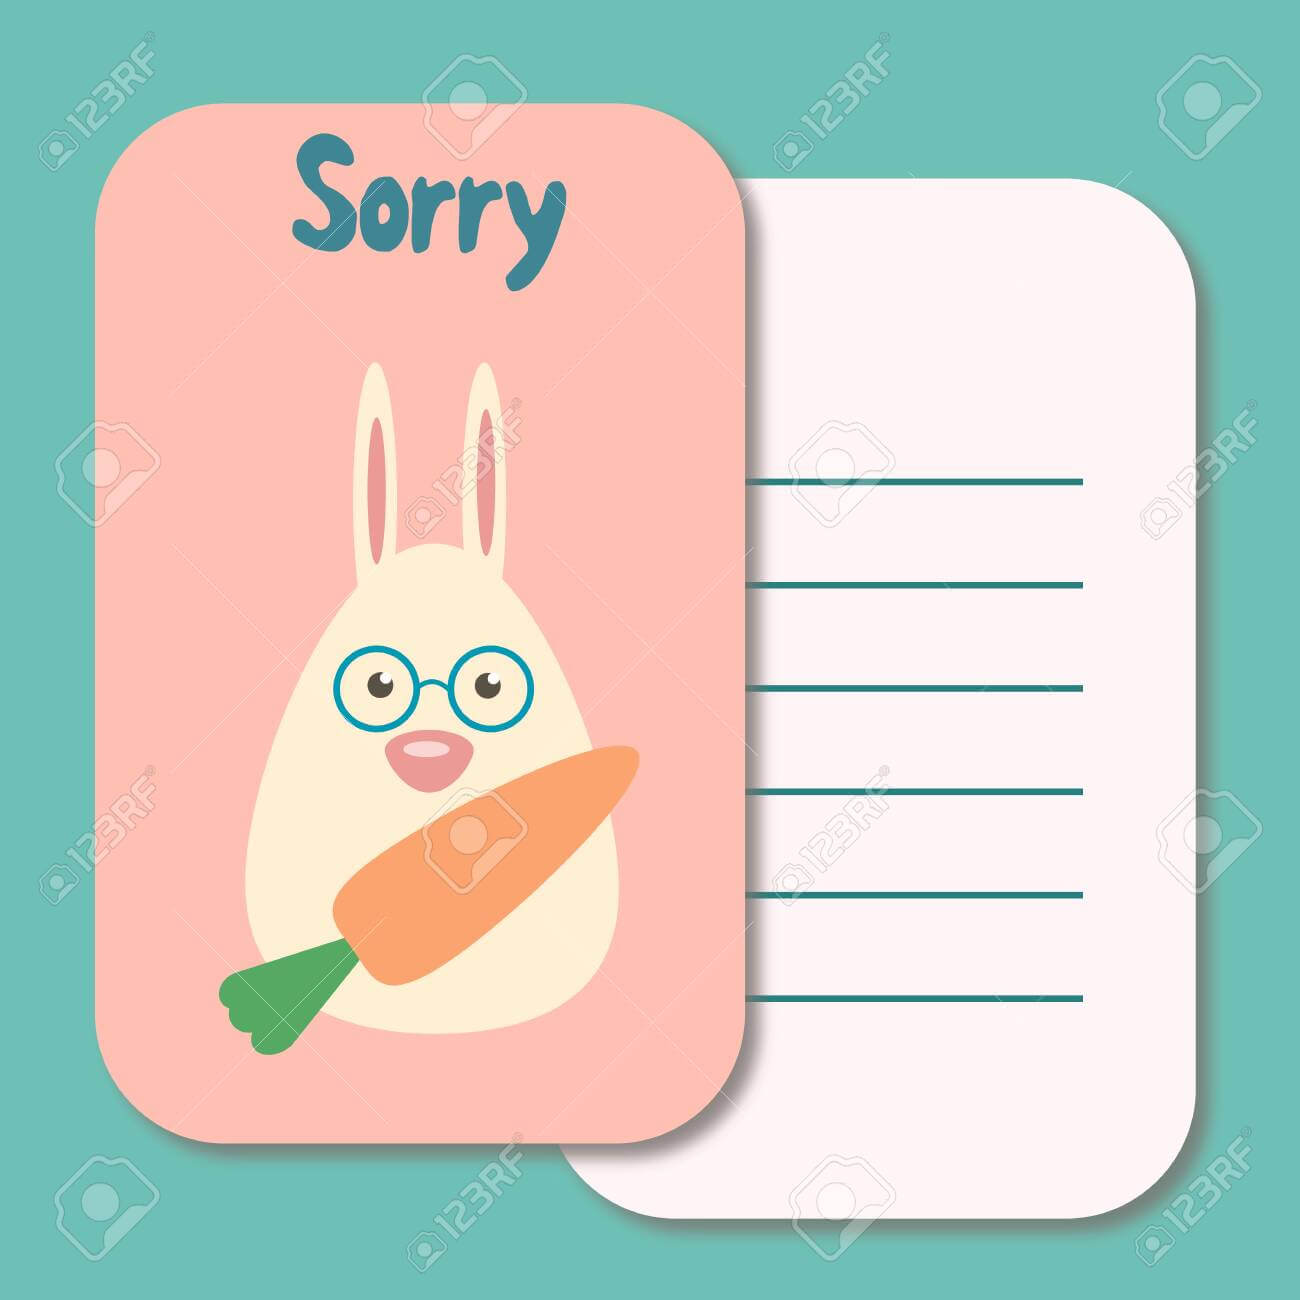 Sorry Card Template - Tomope.zaribanks.co For Sorry Card Template